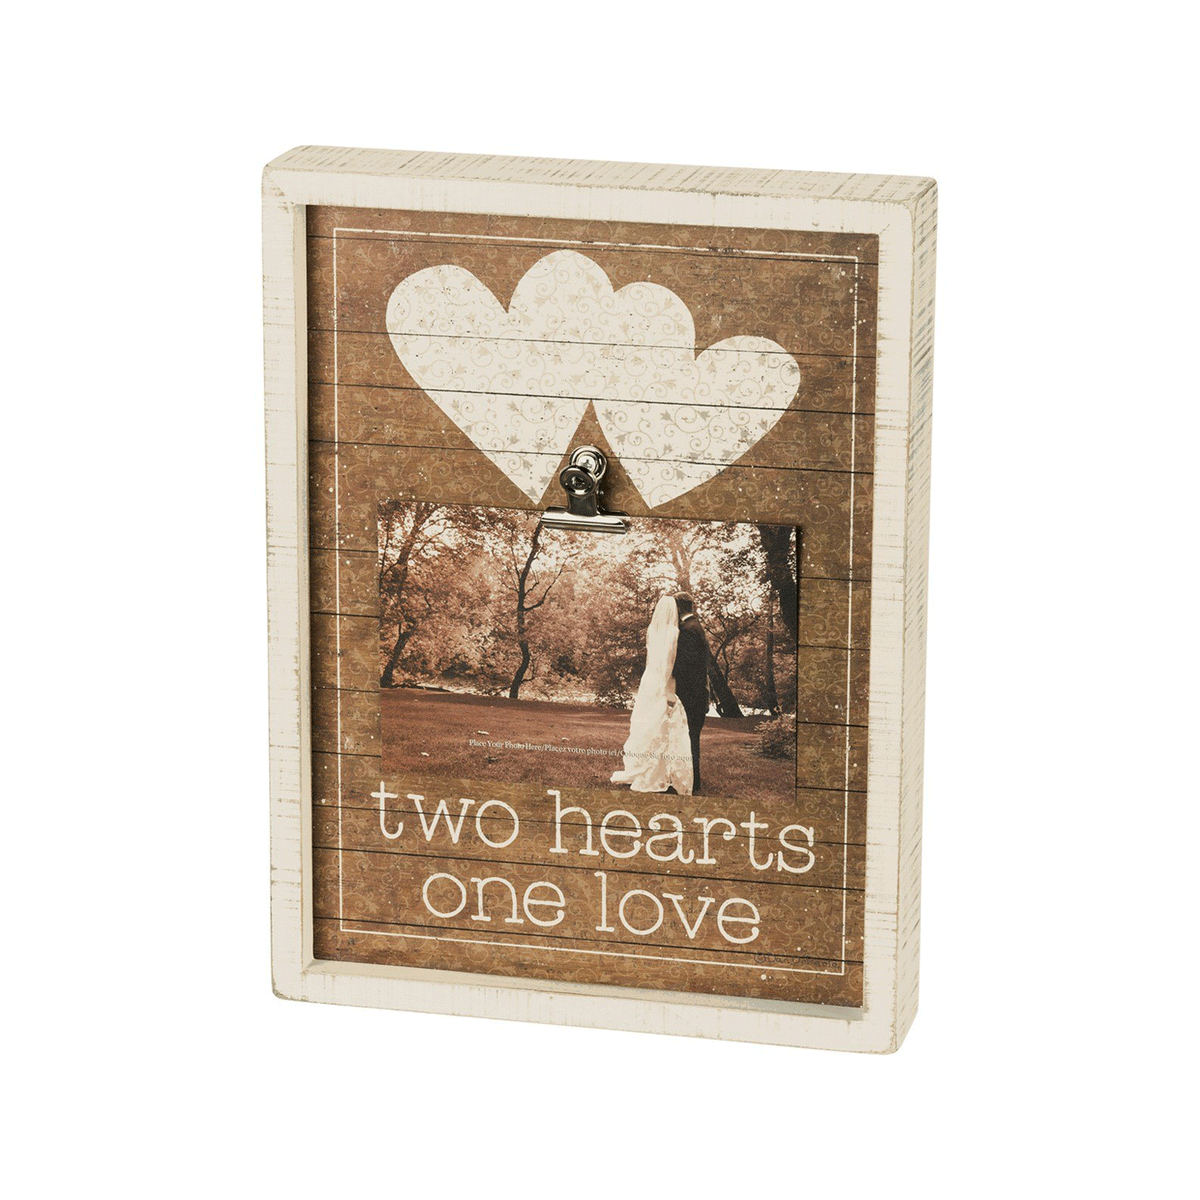 Two Hearts One Love Inset Box Frame - Signs & More